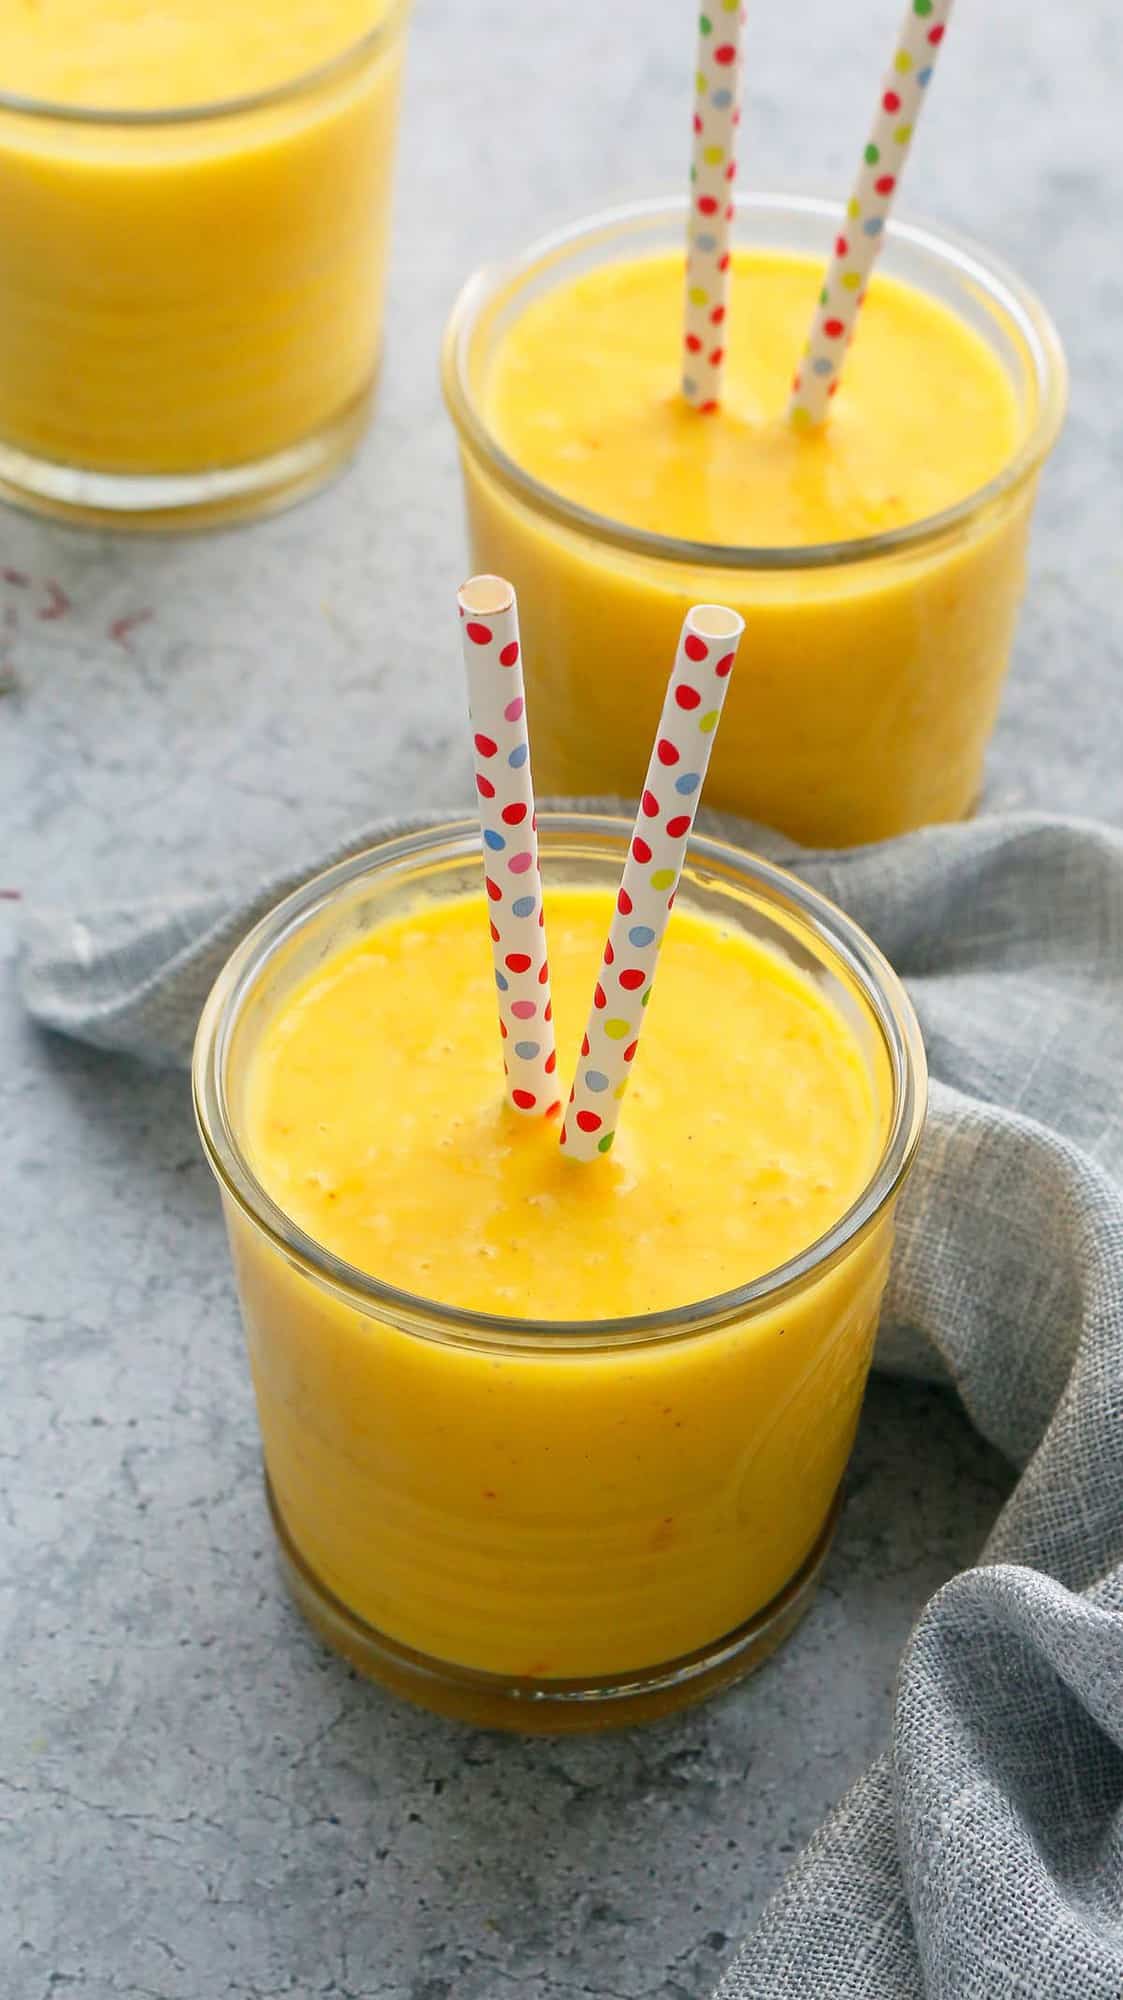 mango and milk served in glasses with paper straws